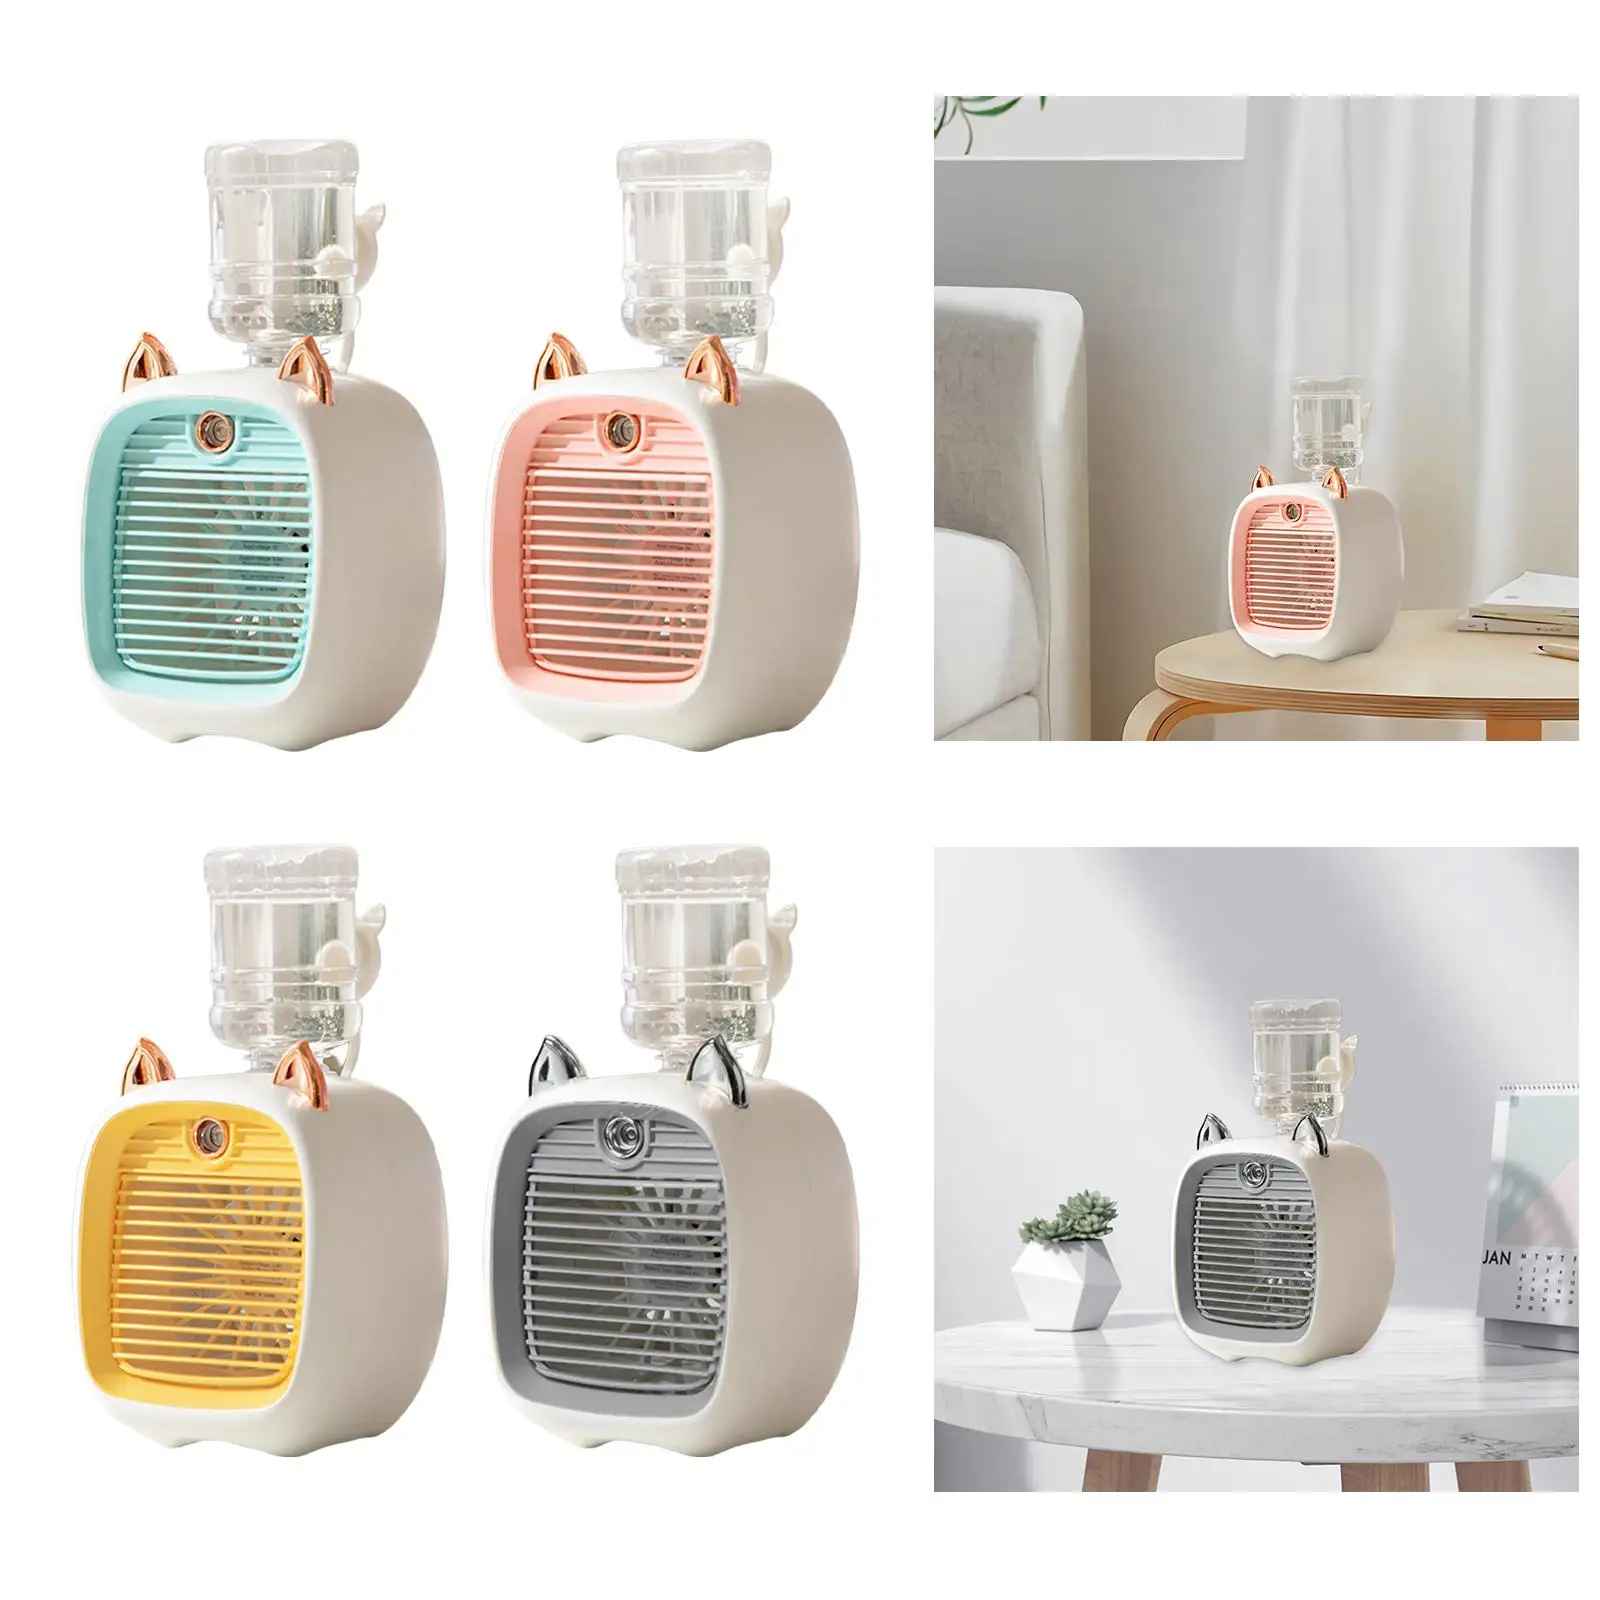 Portable Air , Personal Mini Air Conditioner, 3 in 1 Mini Conditioner Humidifier 3 Speeds Desktop Cooling Fan for Home Bedroom